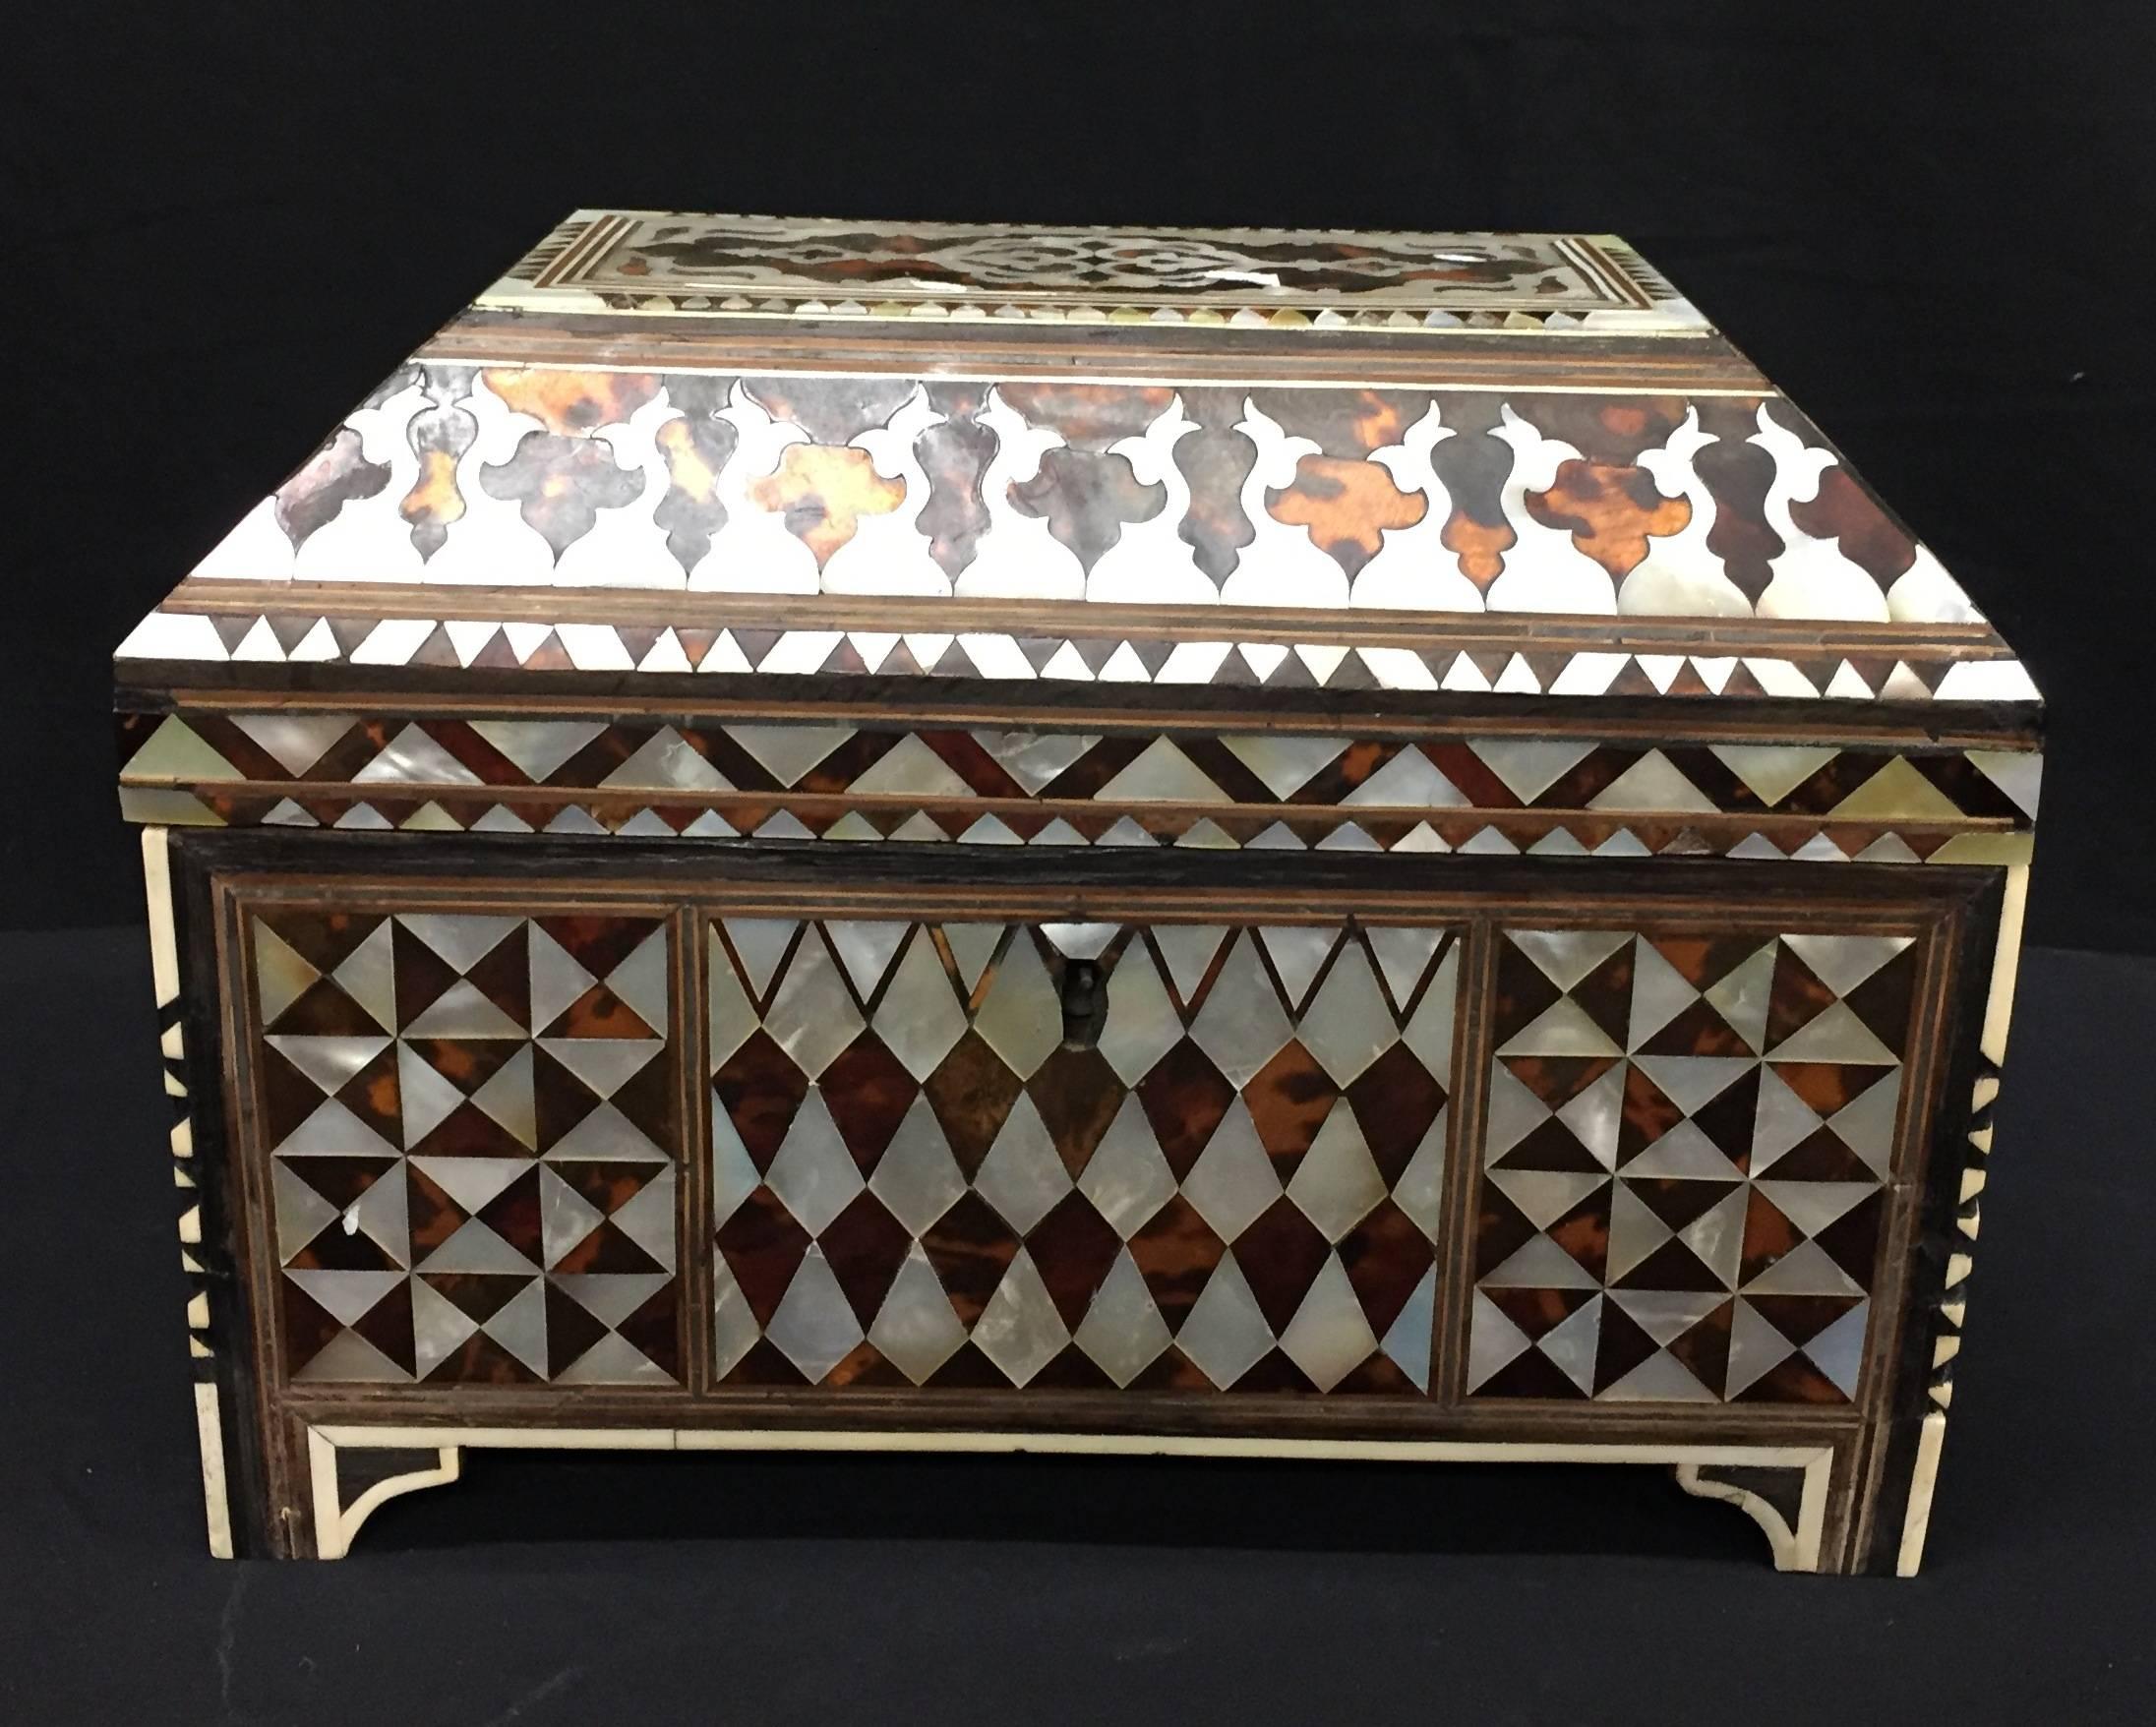 An Ottoman, Turkish, Scribe's box, the wood carcass inlaid with tortoiseshell and mother-of-pearl.